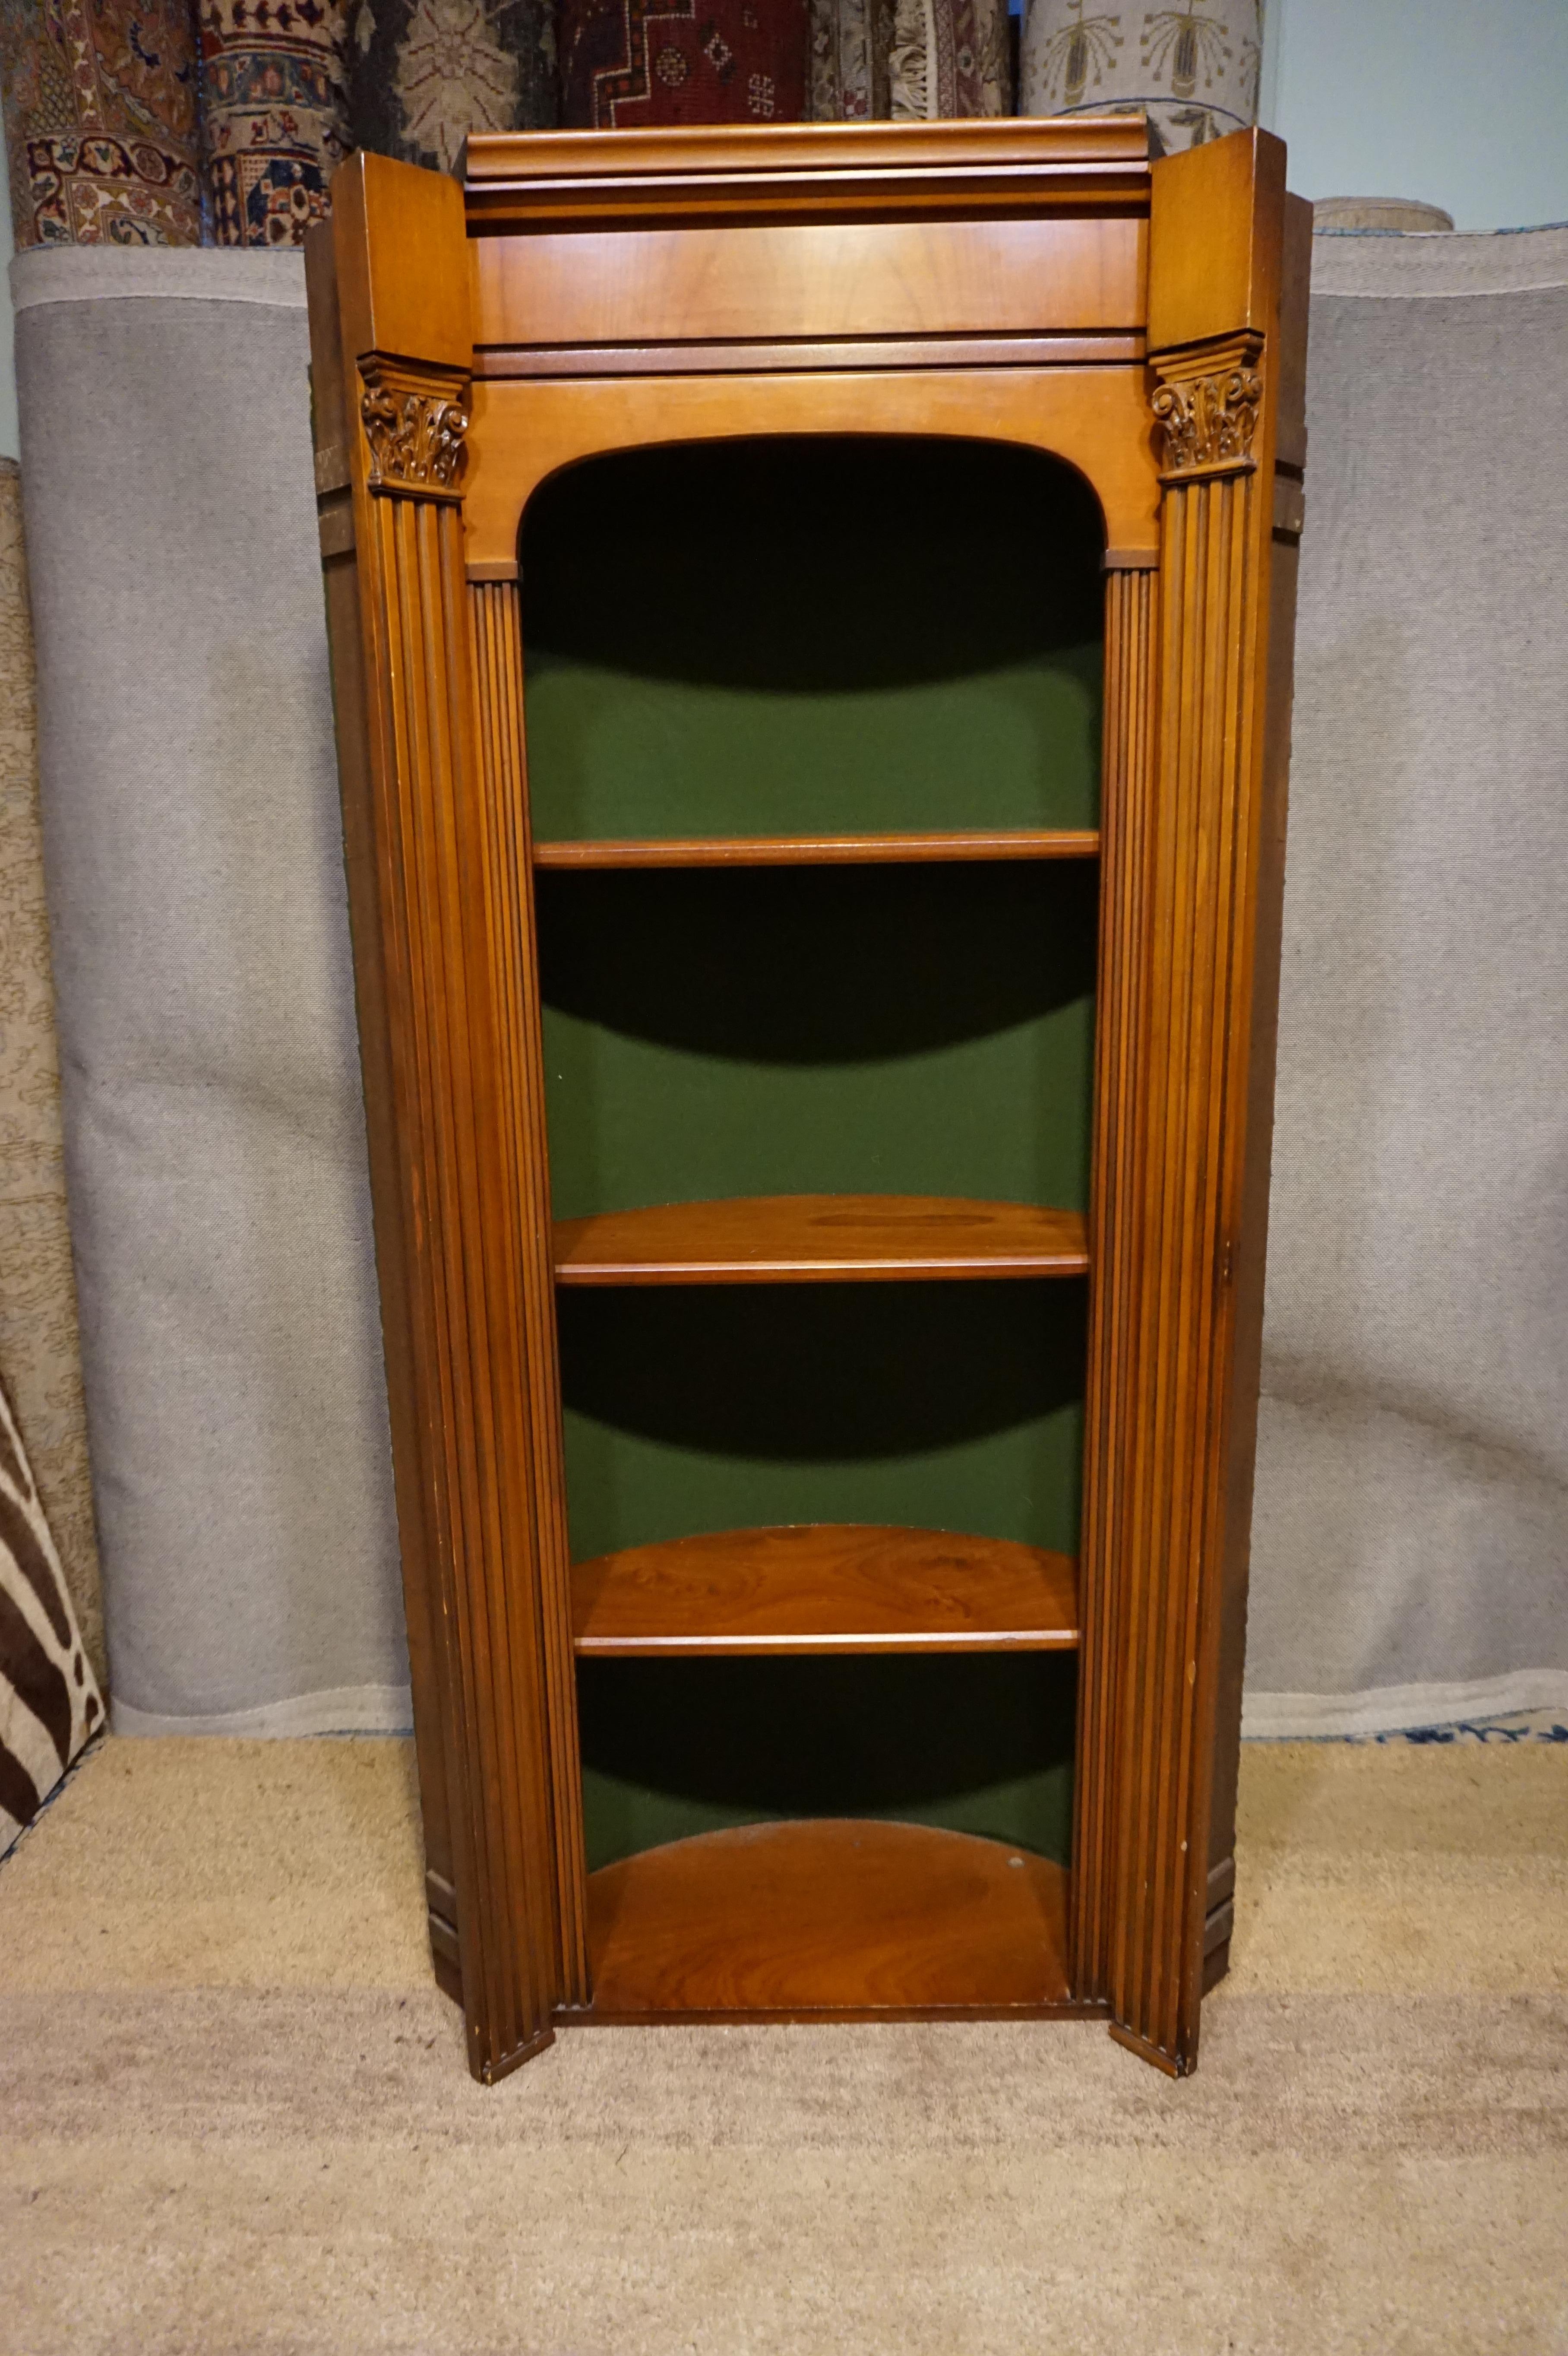 High end vintage corner cabinet built along the neoclassical style with fluted edges. Excellent for a built in project. Ideal for books and display and exuding warmth and finesse.